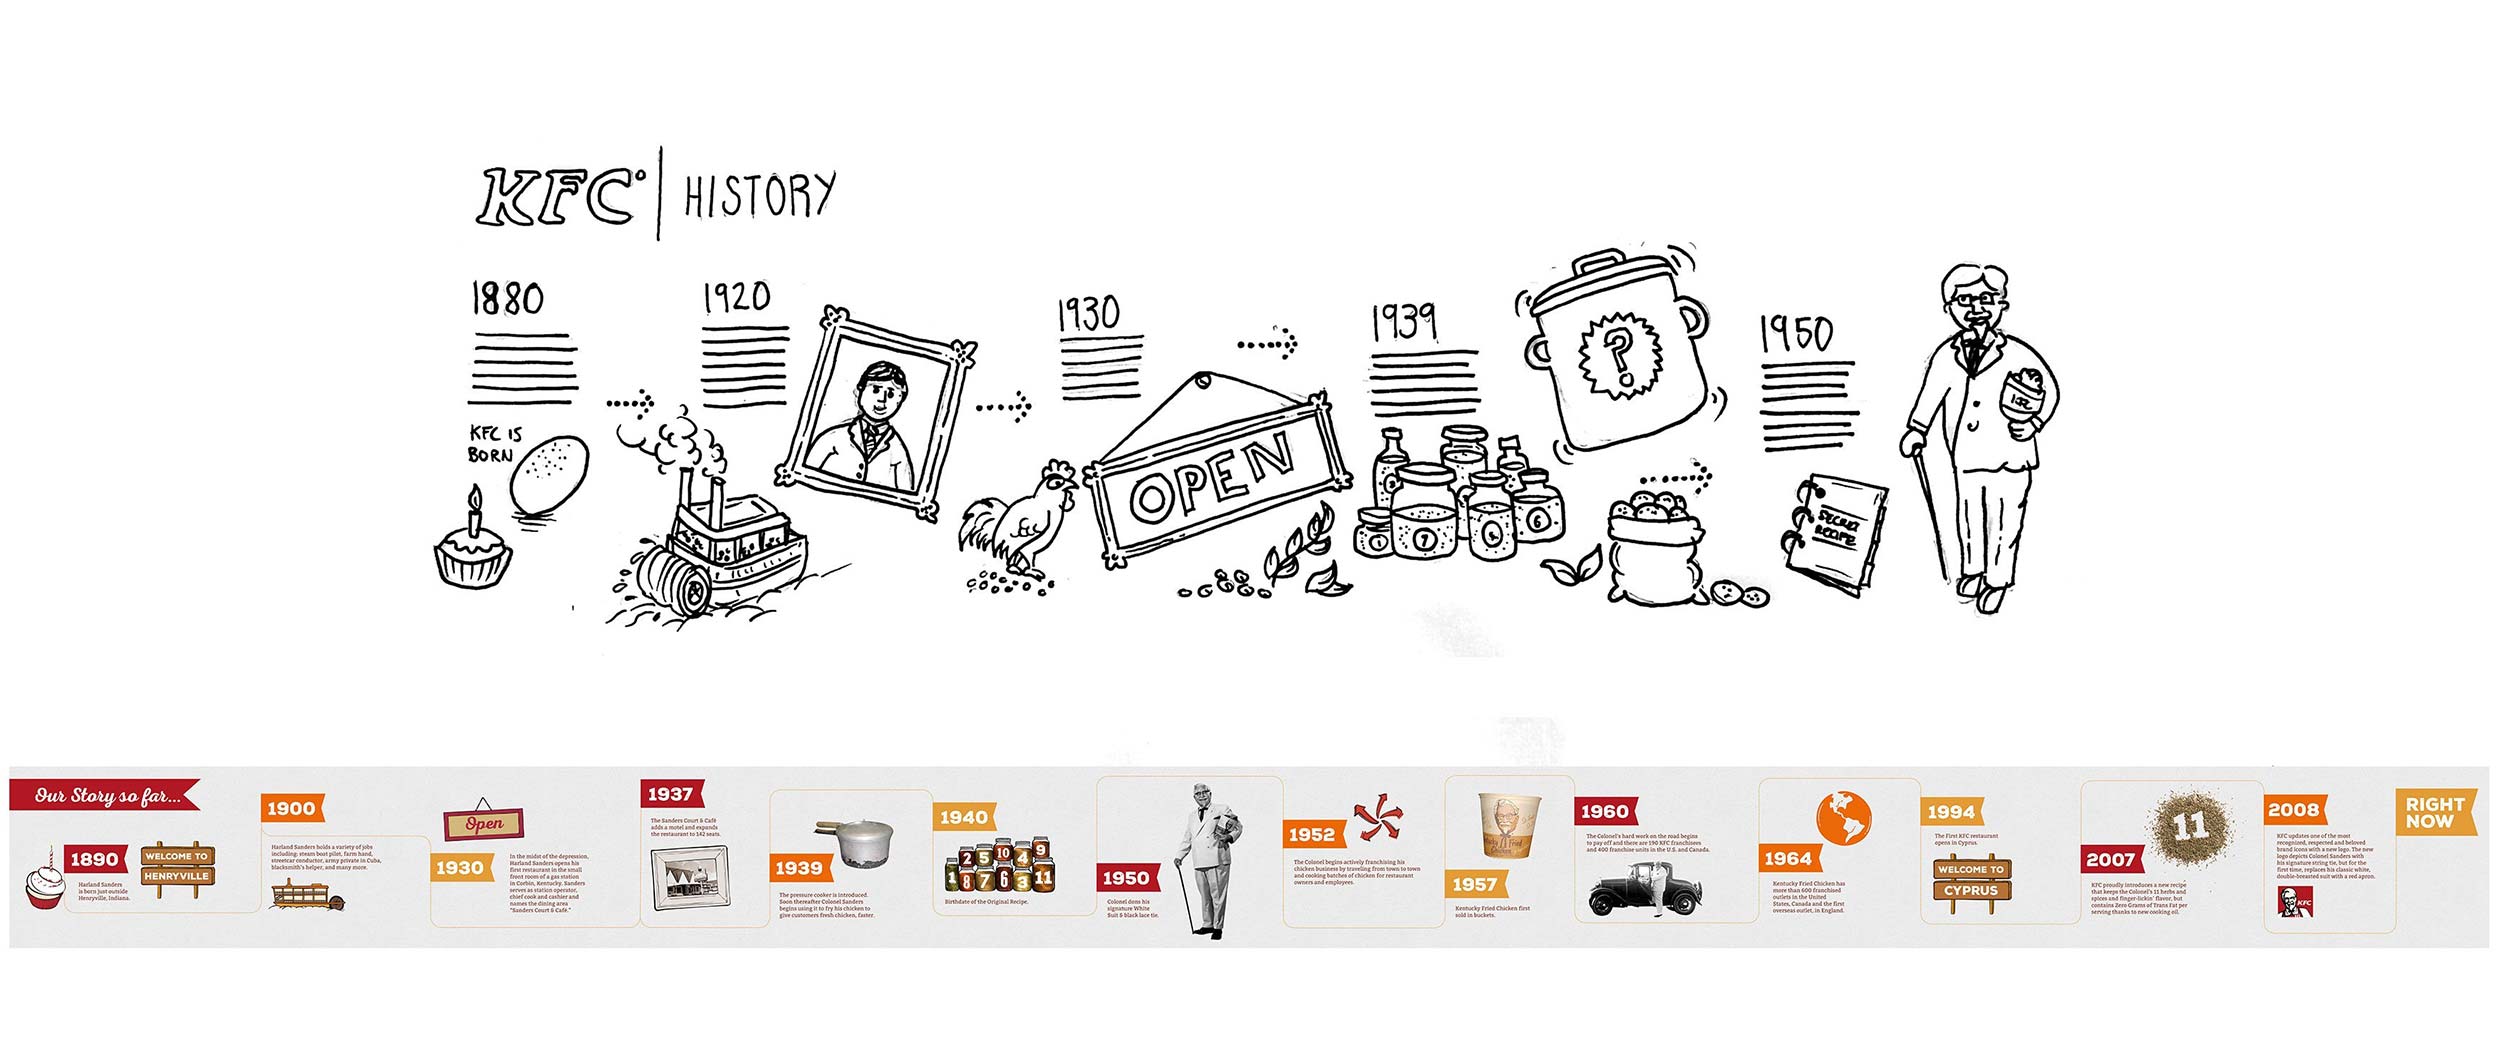 store design concepts and finished KFC history graphic